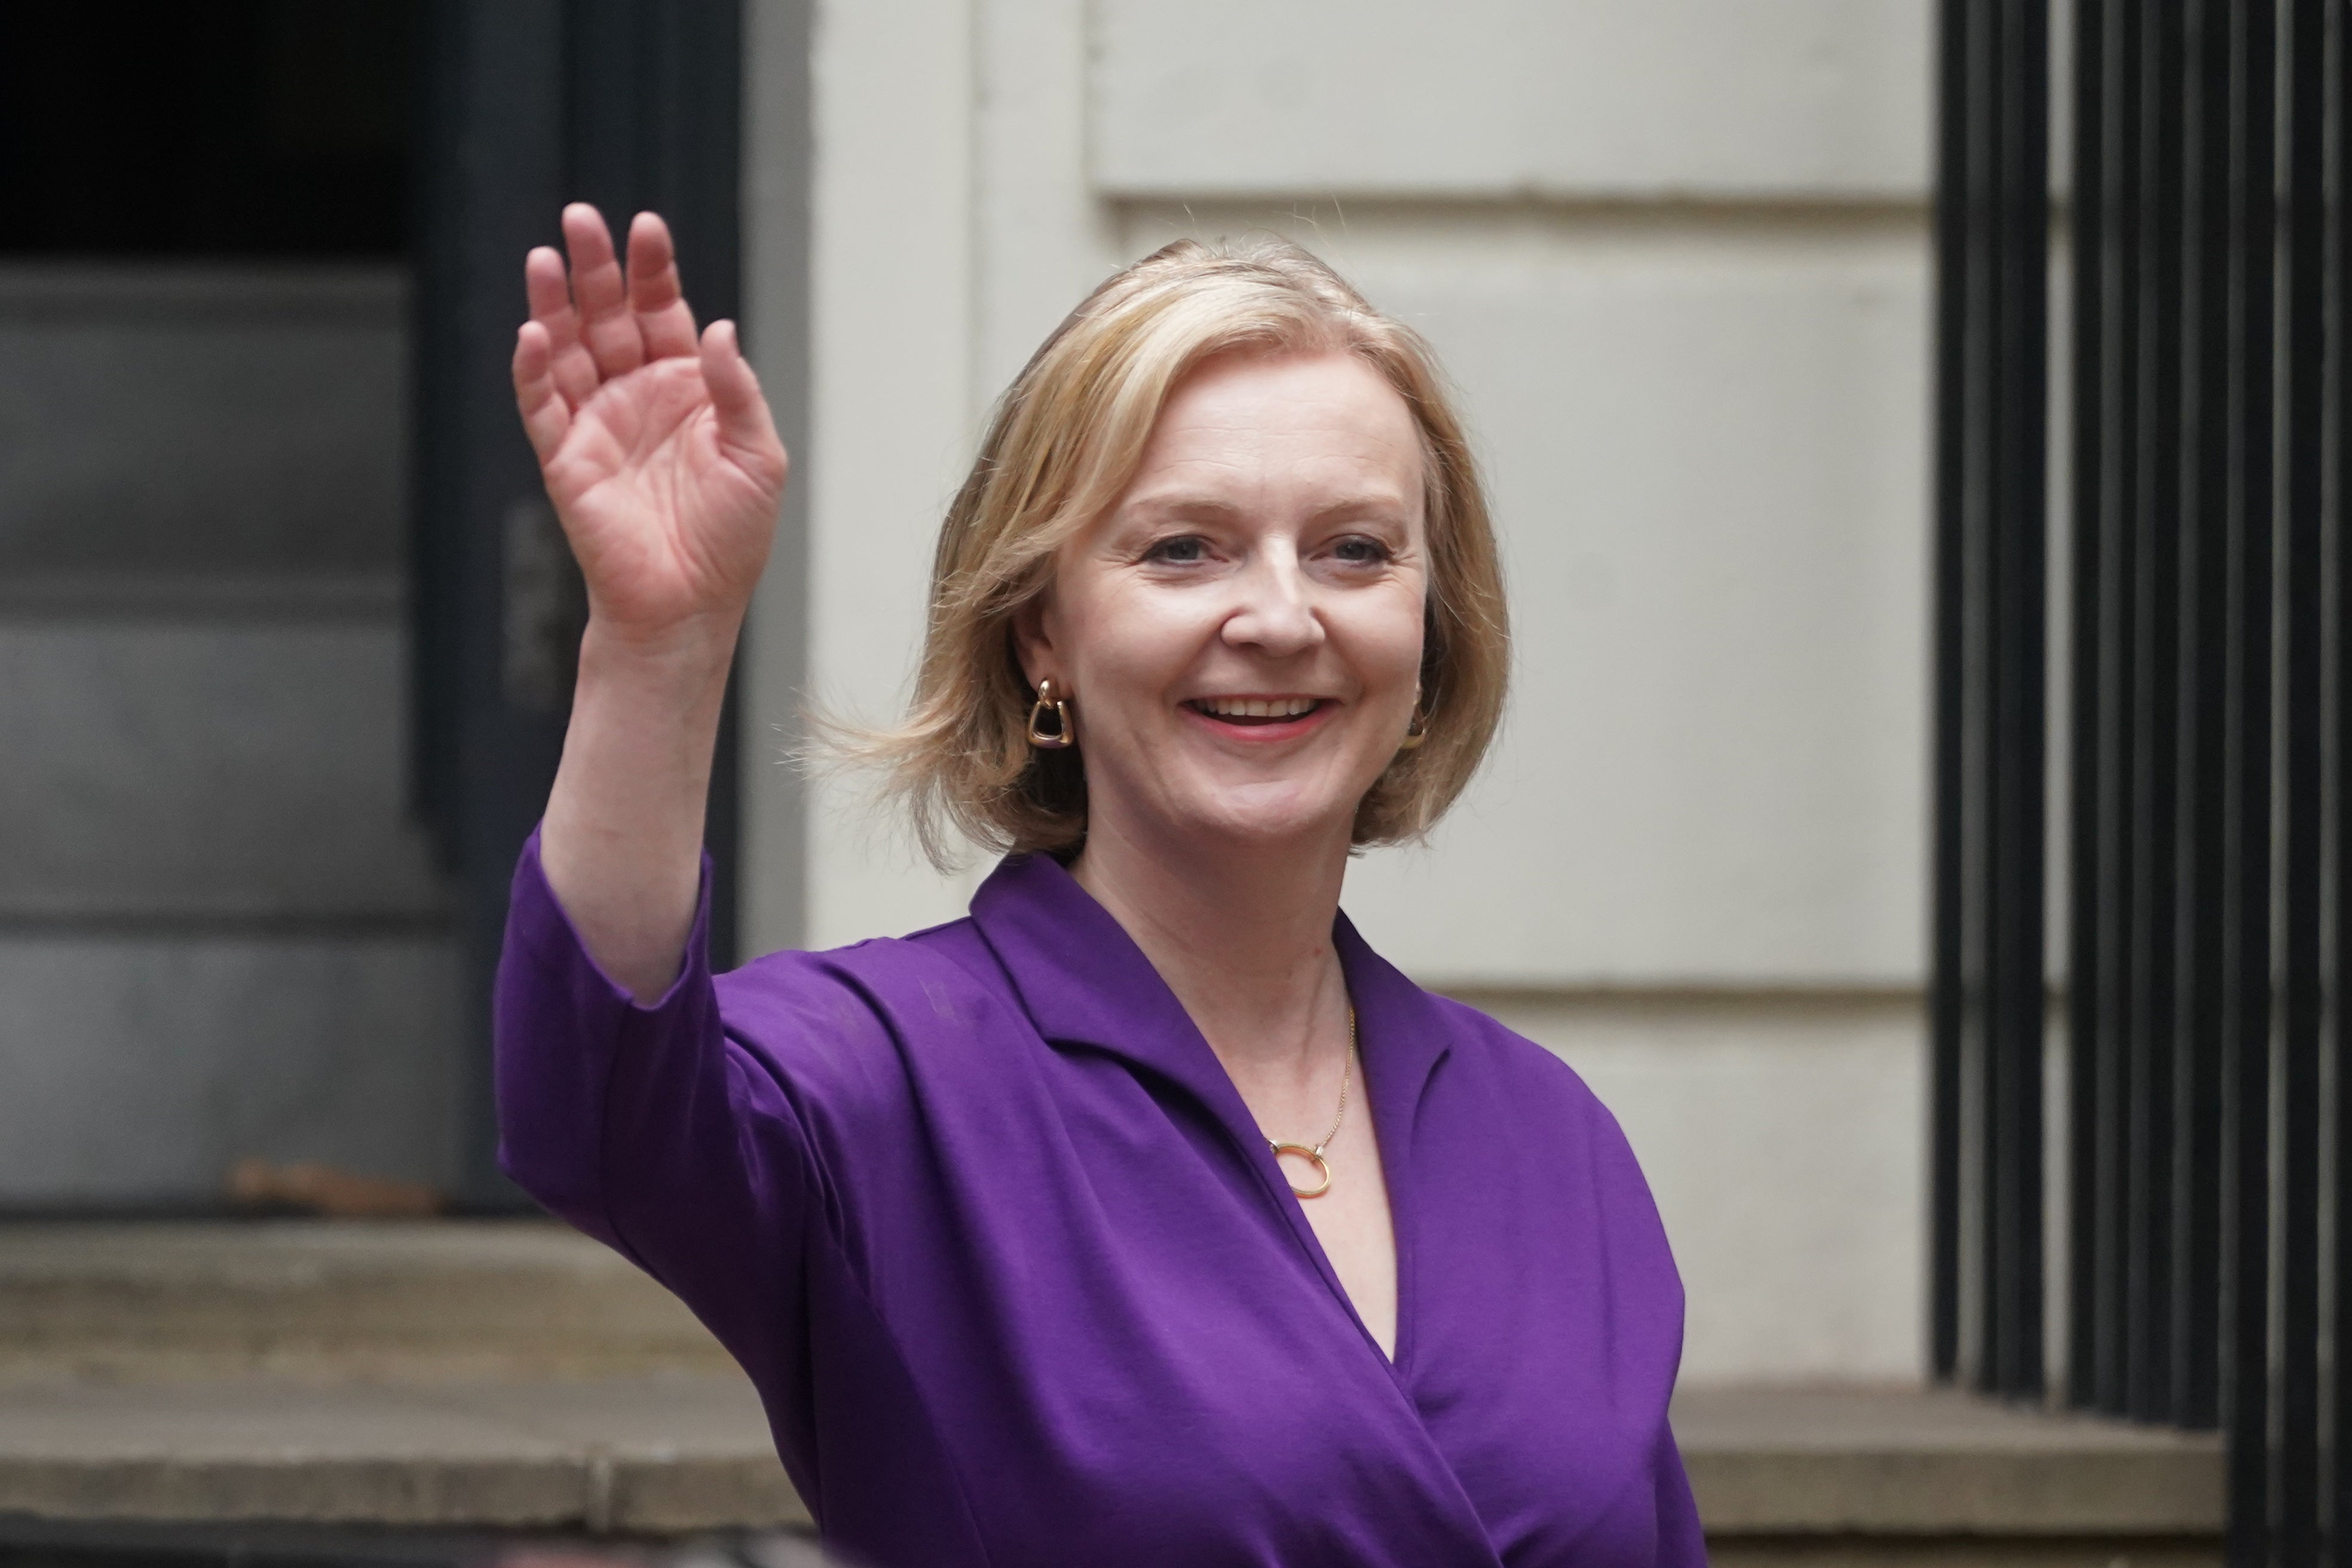 Liz Truss will enter Downing Street after her triumph in the Tory leadership